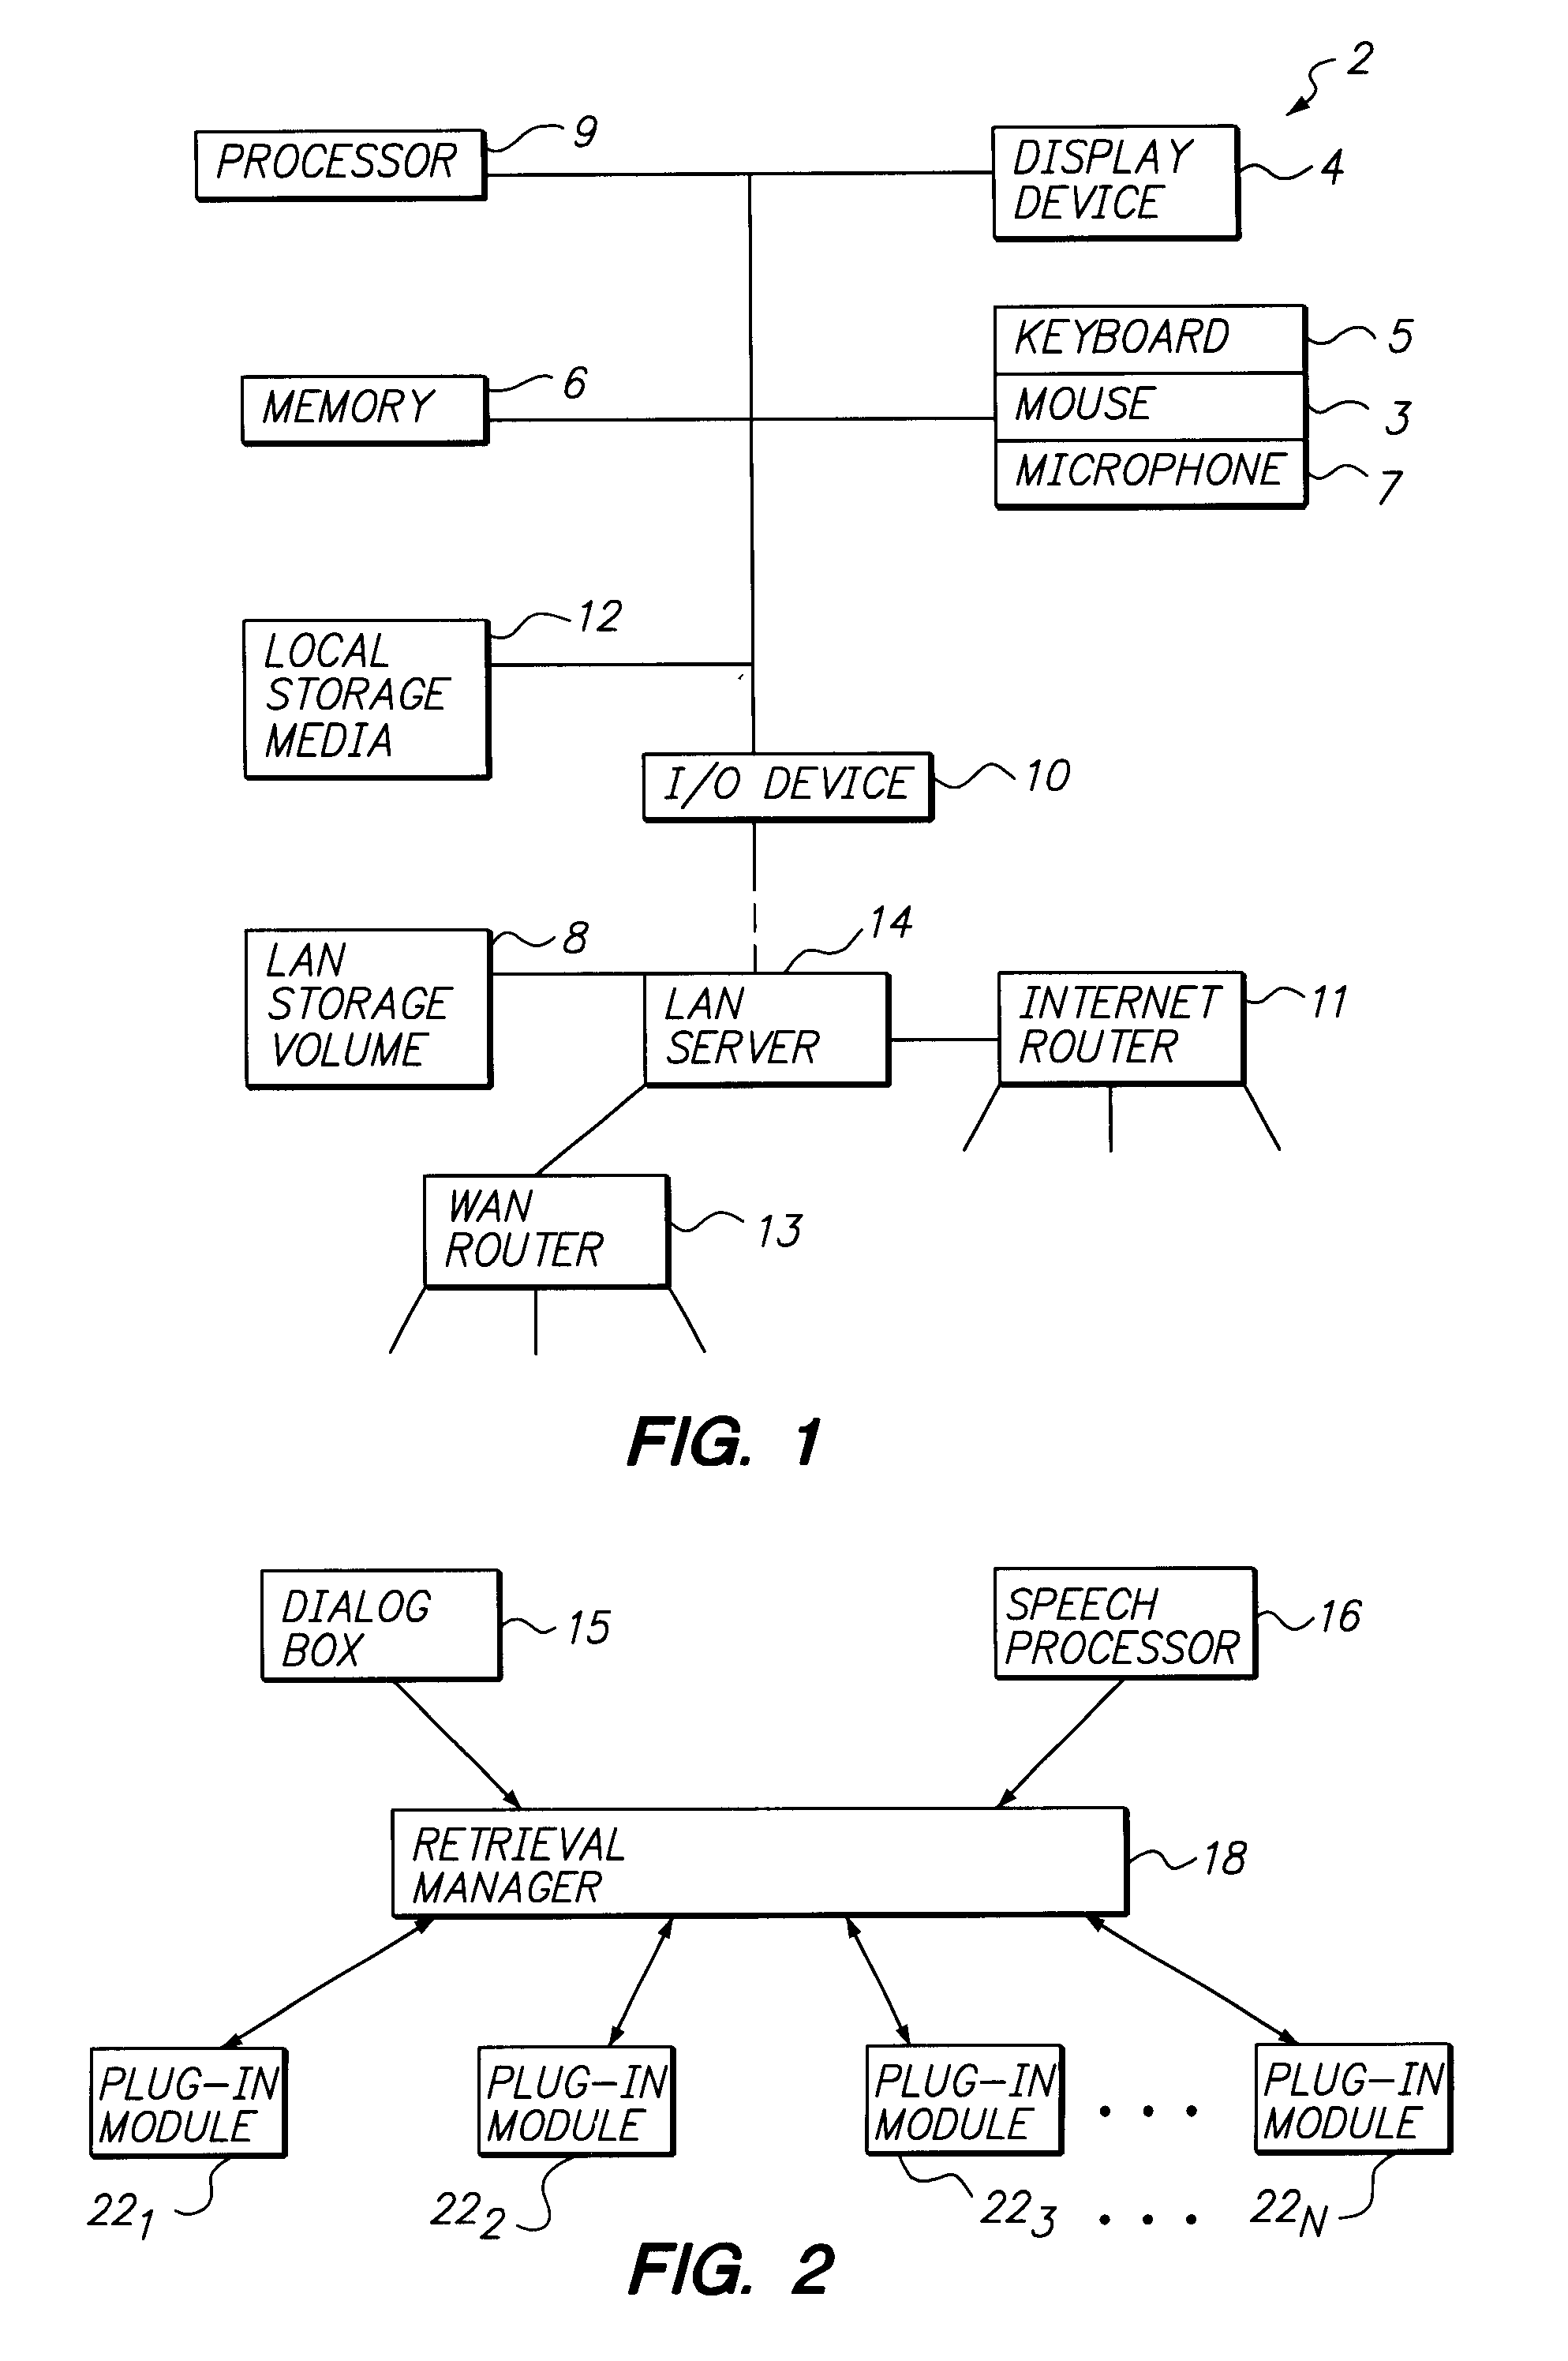 Universal interface for retrieval of information in a computer system